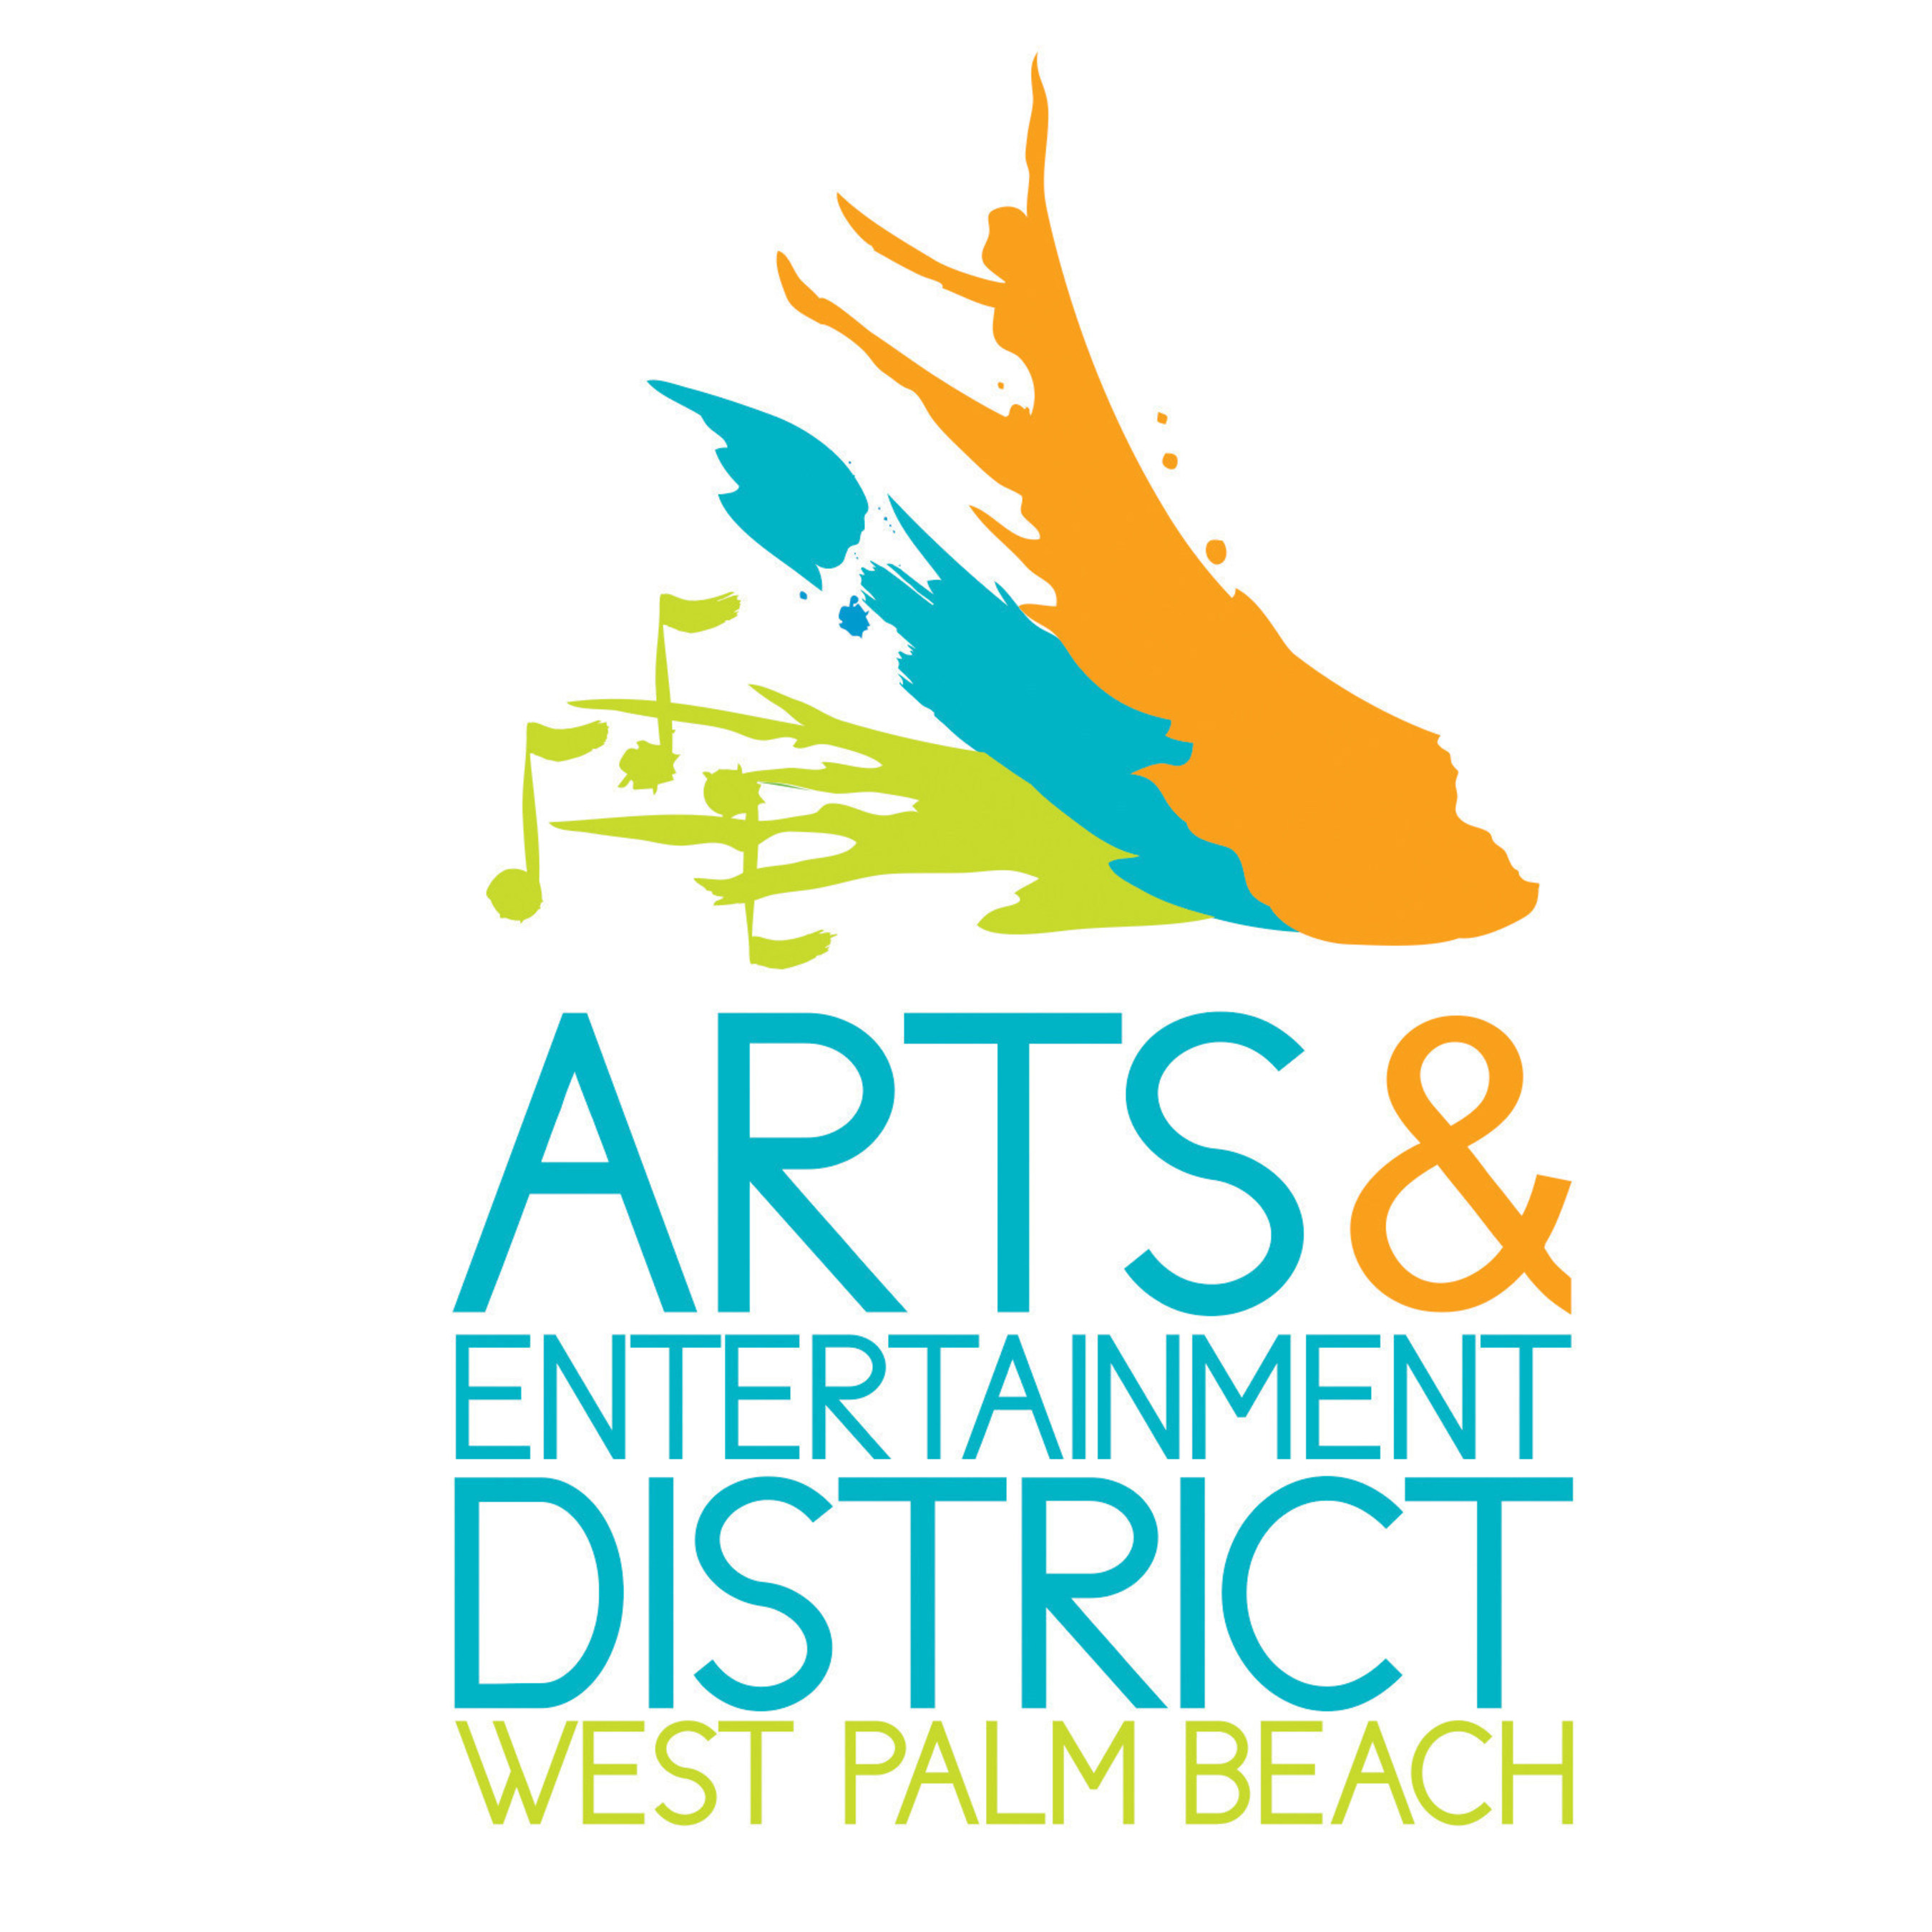 About the West Palm Beach Arts & Entertainment District: The West Palm Beach A&E District is a centralized collection of inspiring arts and entertainment venues; art and history museums; galleries; libraries; performing arts companies; and art education institutions. Situated in the heart of South Florida's most progressive city, the District includes more than 20 distinct and distinguished cultural destinations that form a defining industry cluster. The A&E District enhances the appeal of West Palm Beach as a visitor destination, drawing attention to its status as a vibrant city illuminated by its beauty and range of creative expression. A free trolley dedicated to connecting partners makes getting around the District easy and enjoyable.